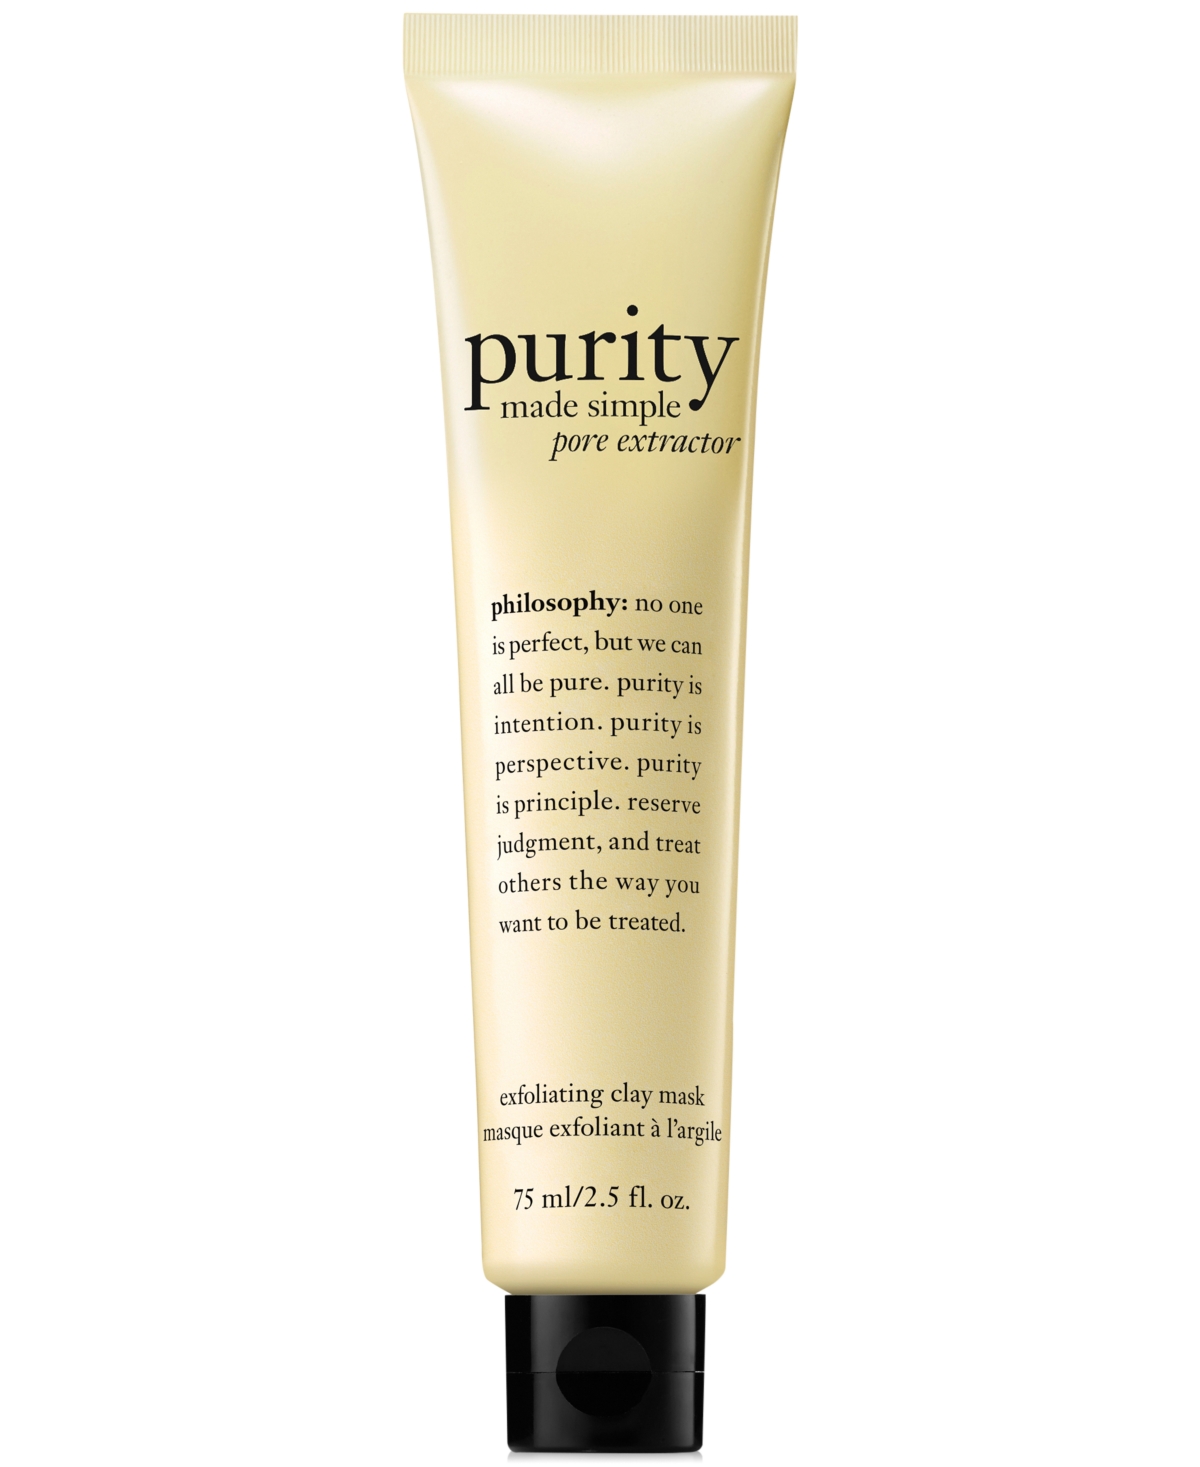 Purity Made Simple Pore Extractor Exfoliating Clay Mask, 2.5 oz